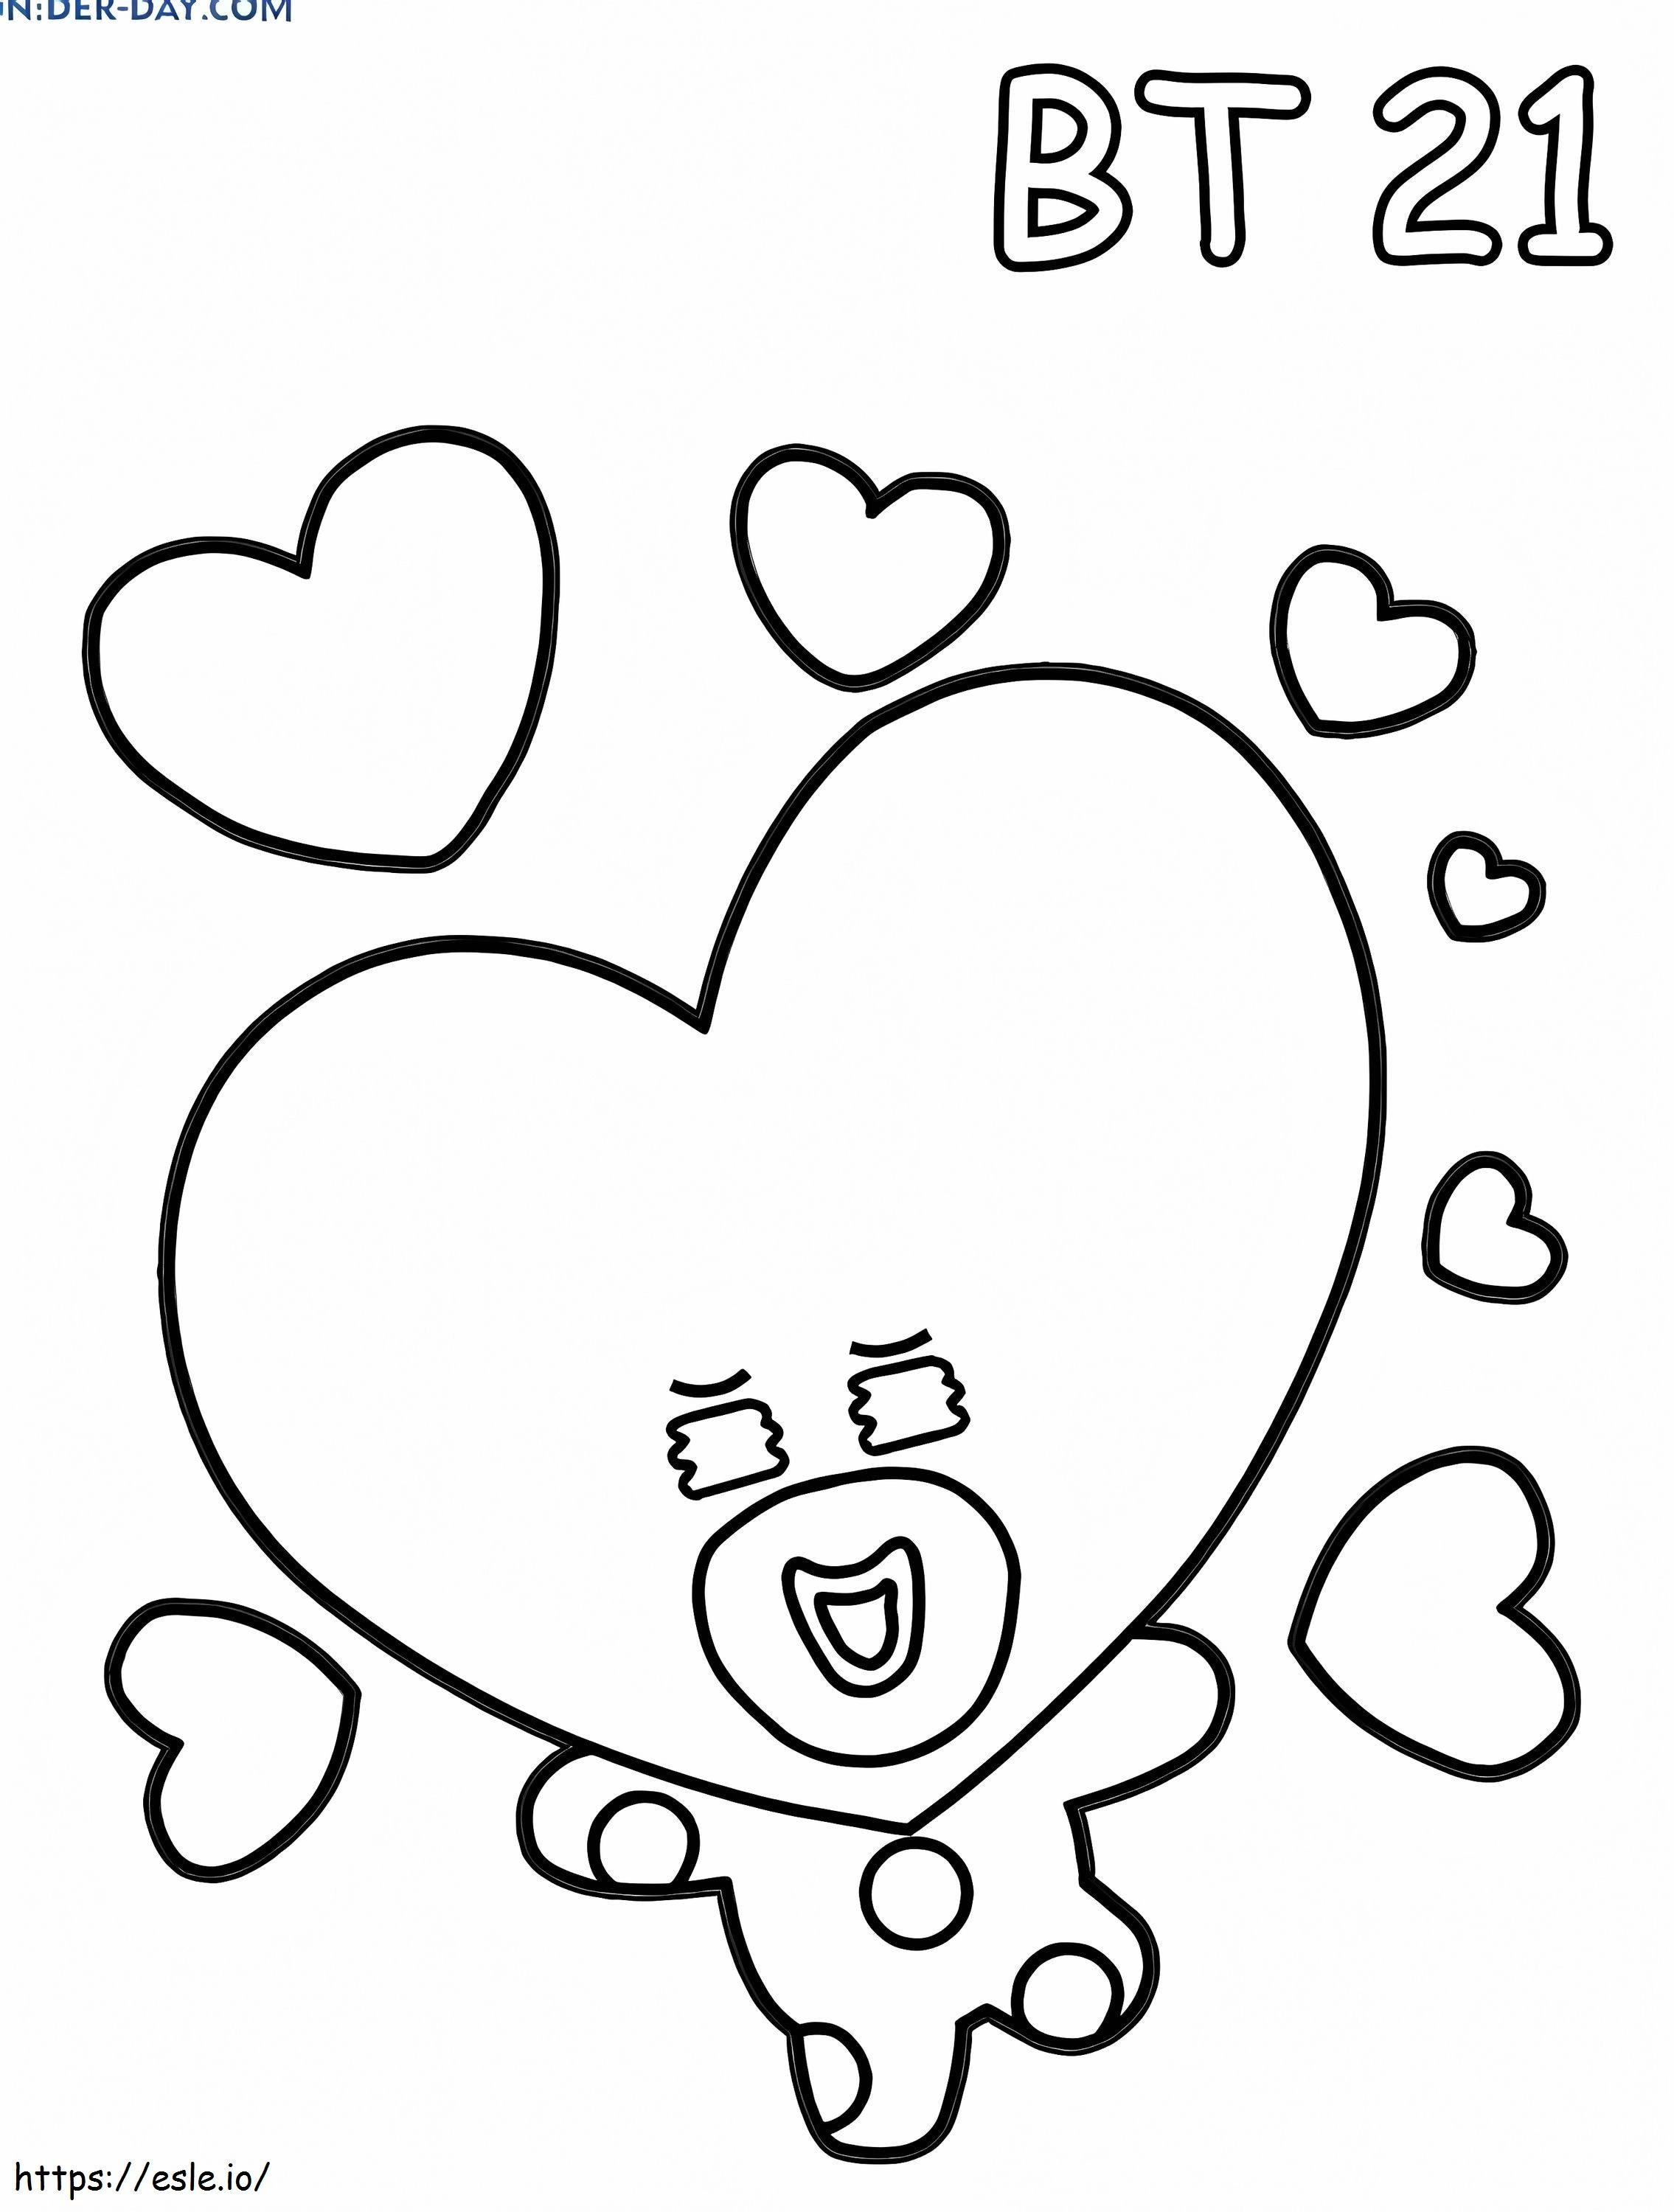 Happy Tata BT21 coloring page